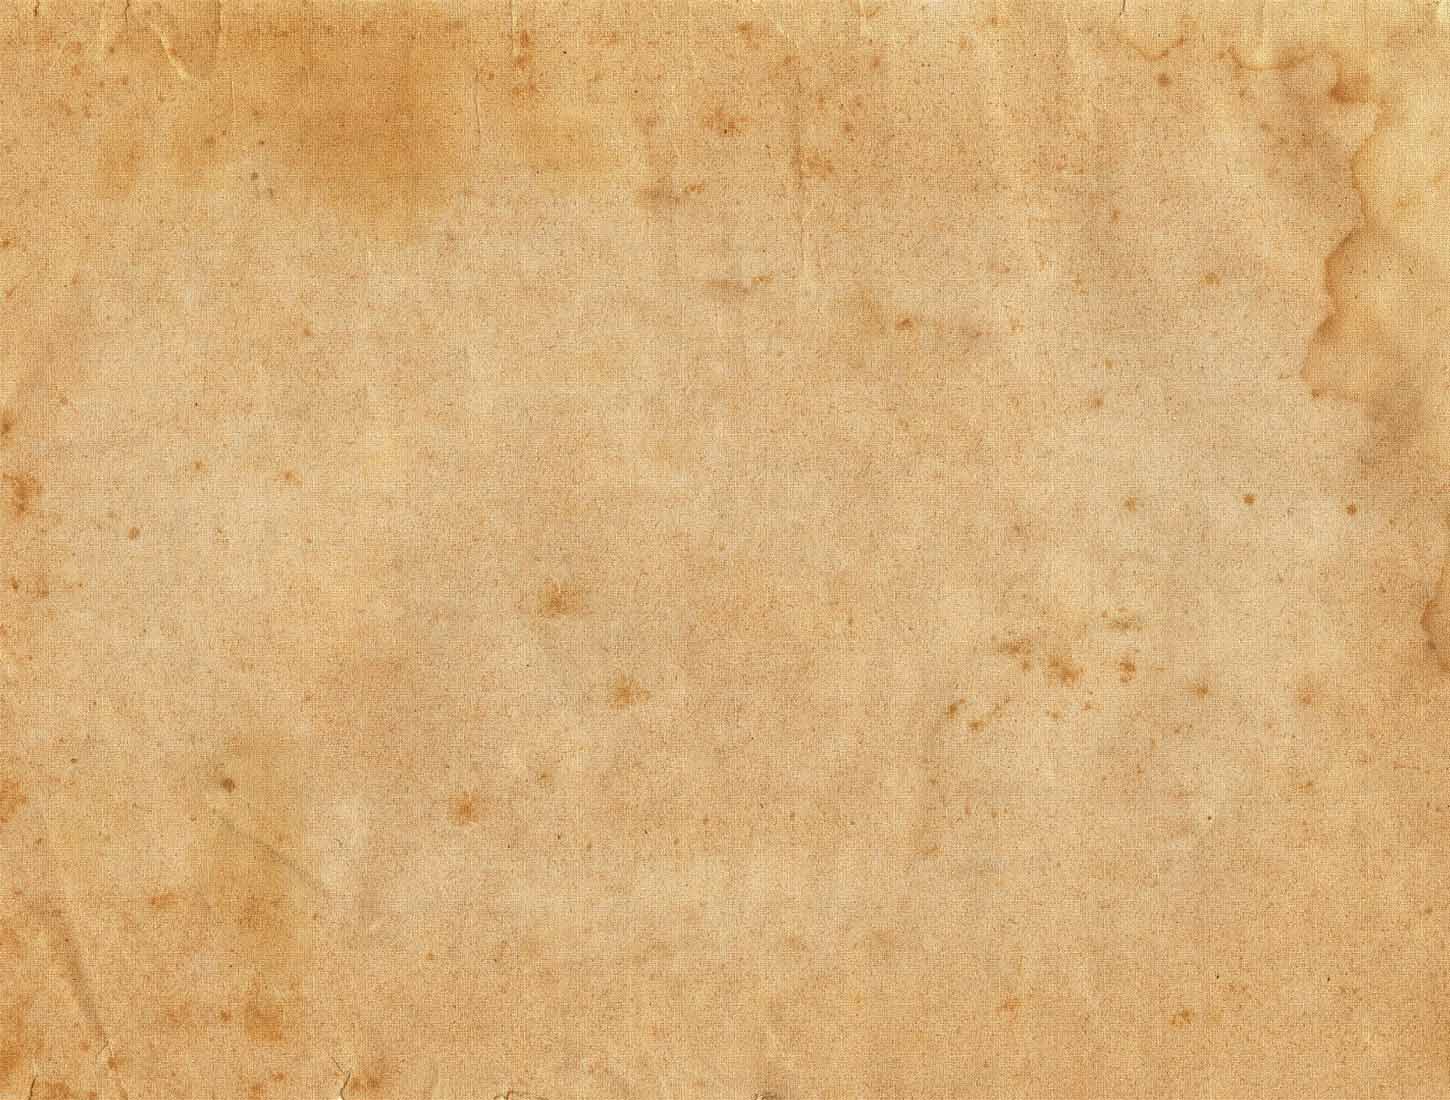 Old Beige Blank Paper backgrounds